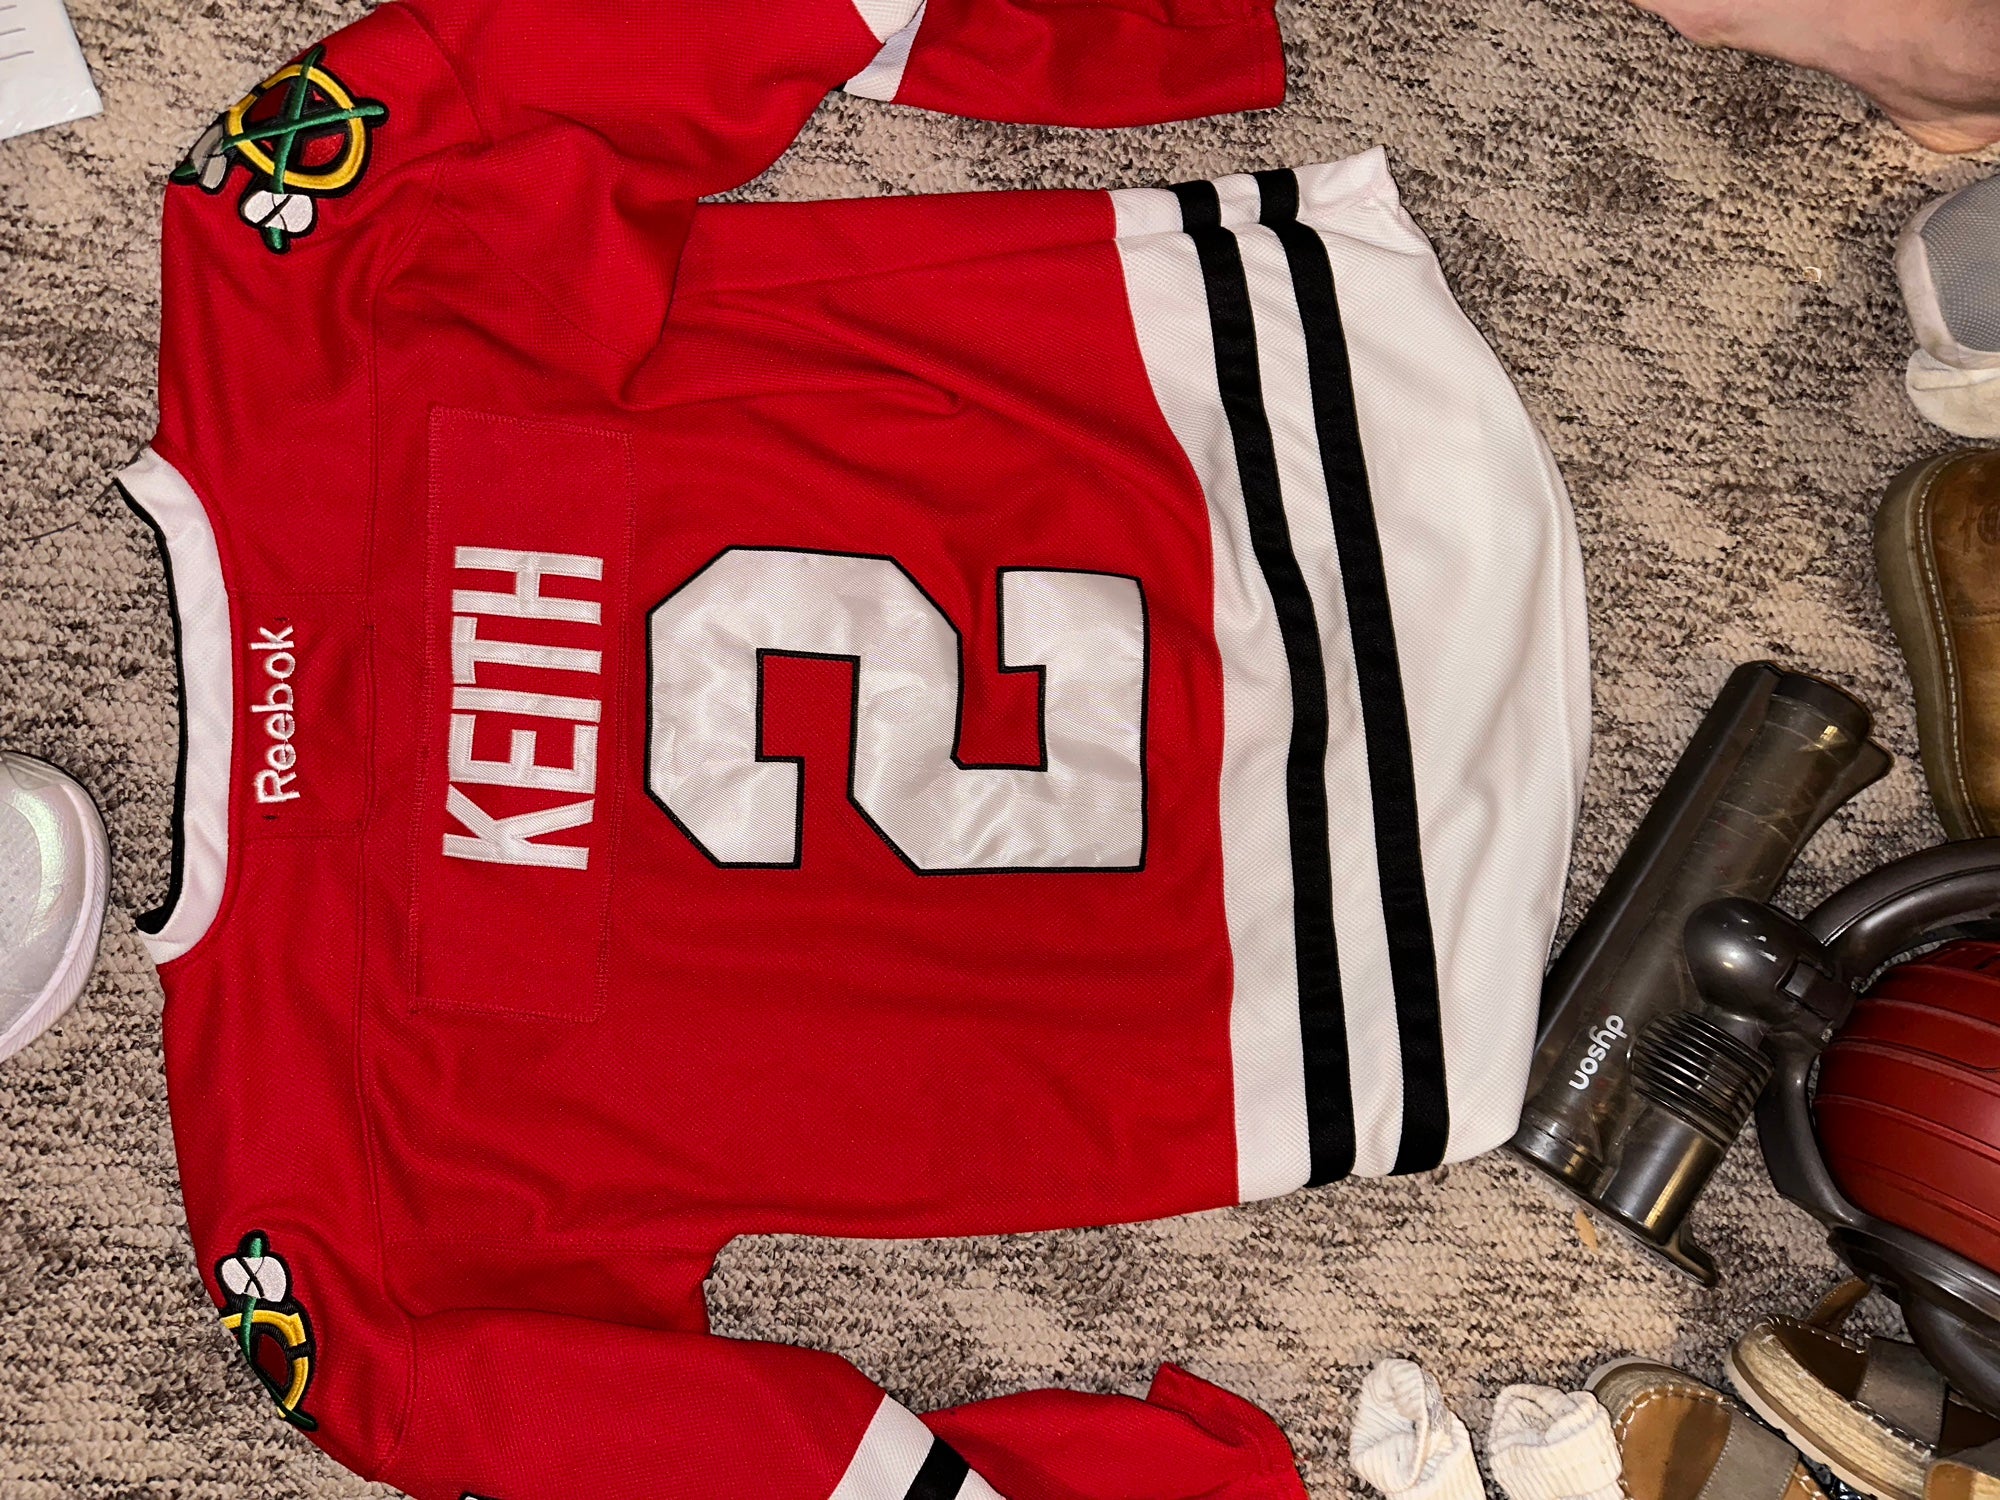 Duncan Keith Autographed and Framed Chicago Blackhawks Jersey